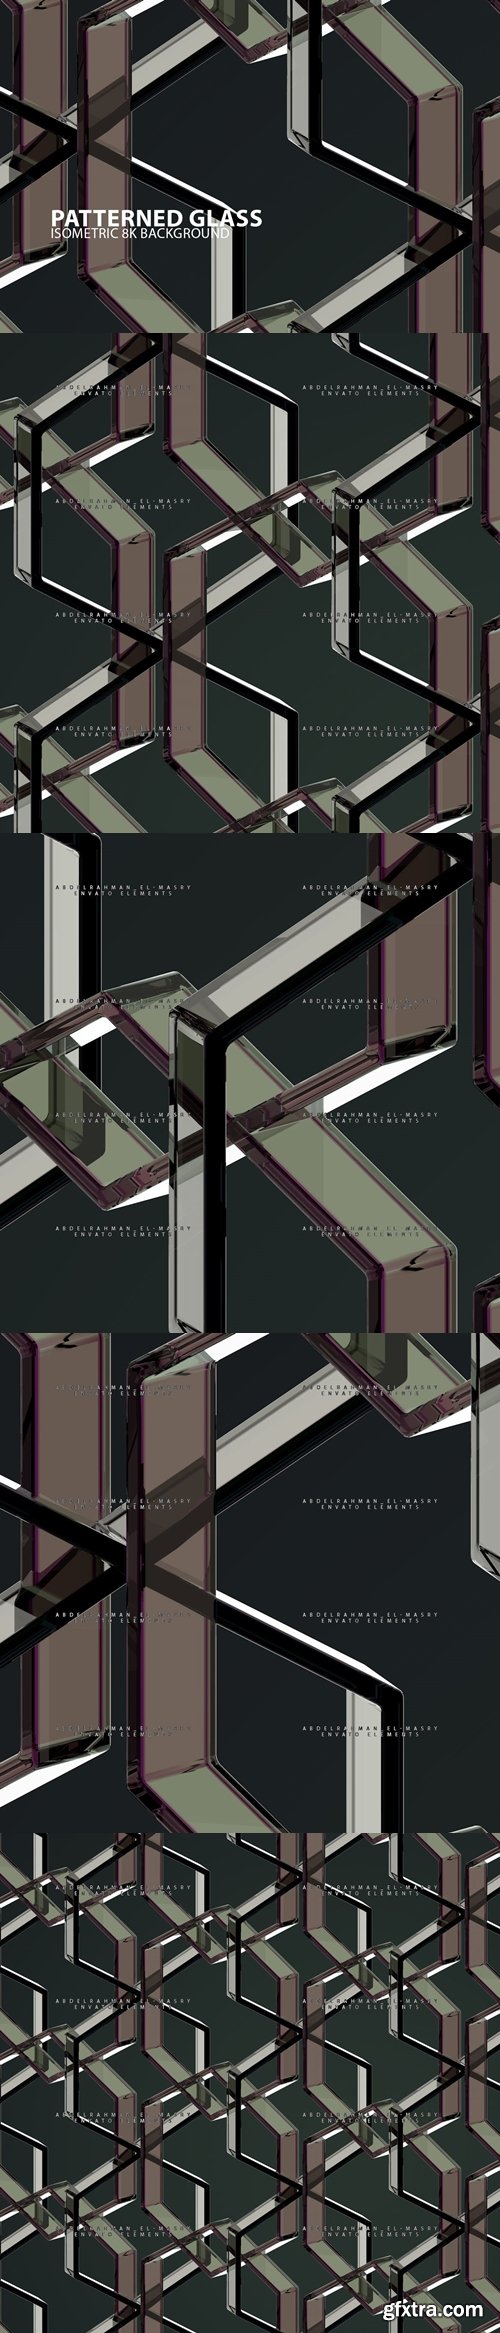 Patterned Glass Background